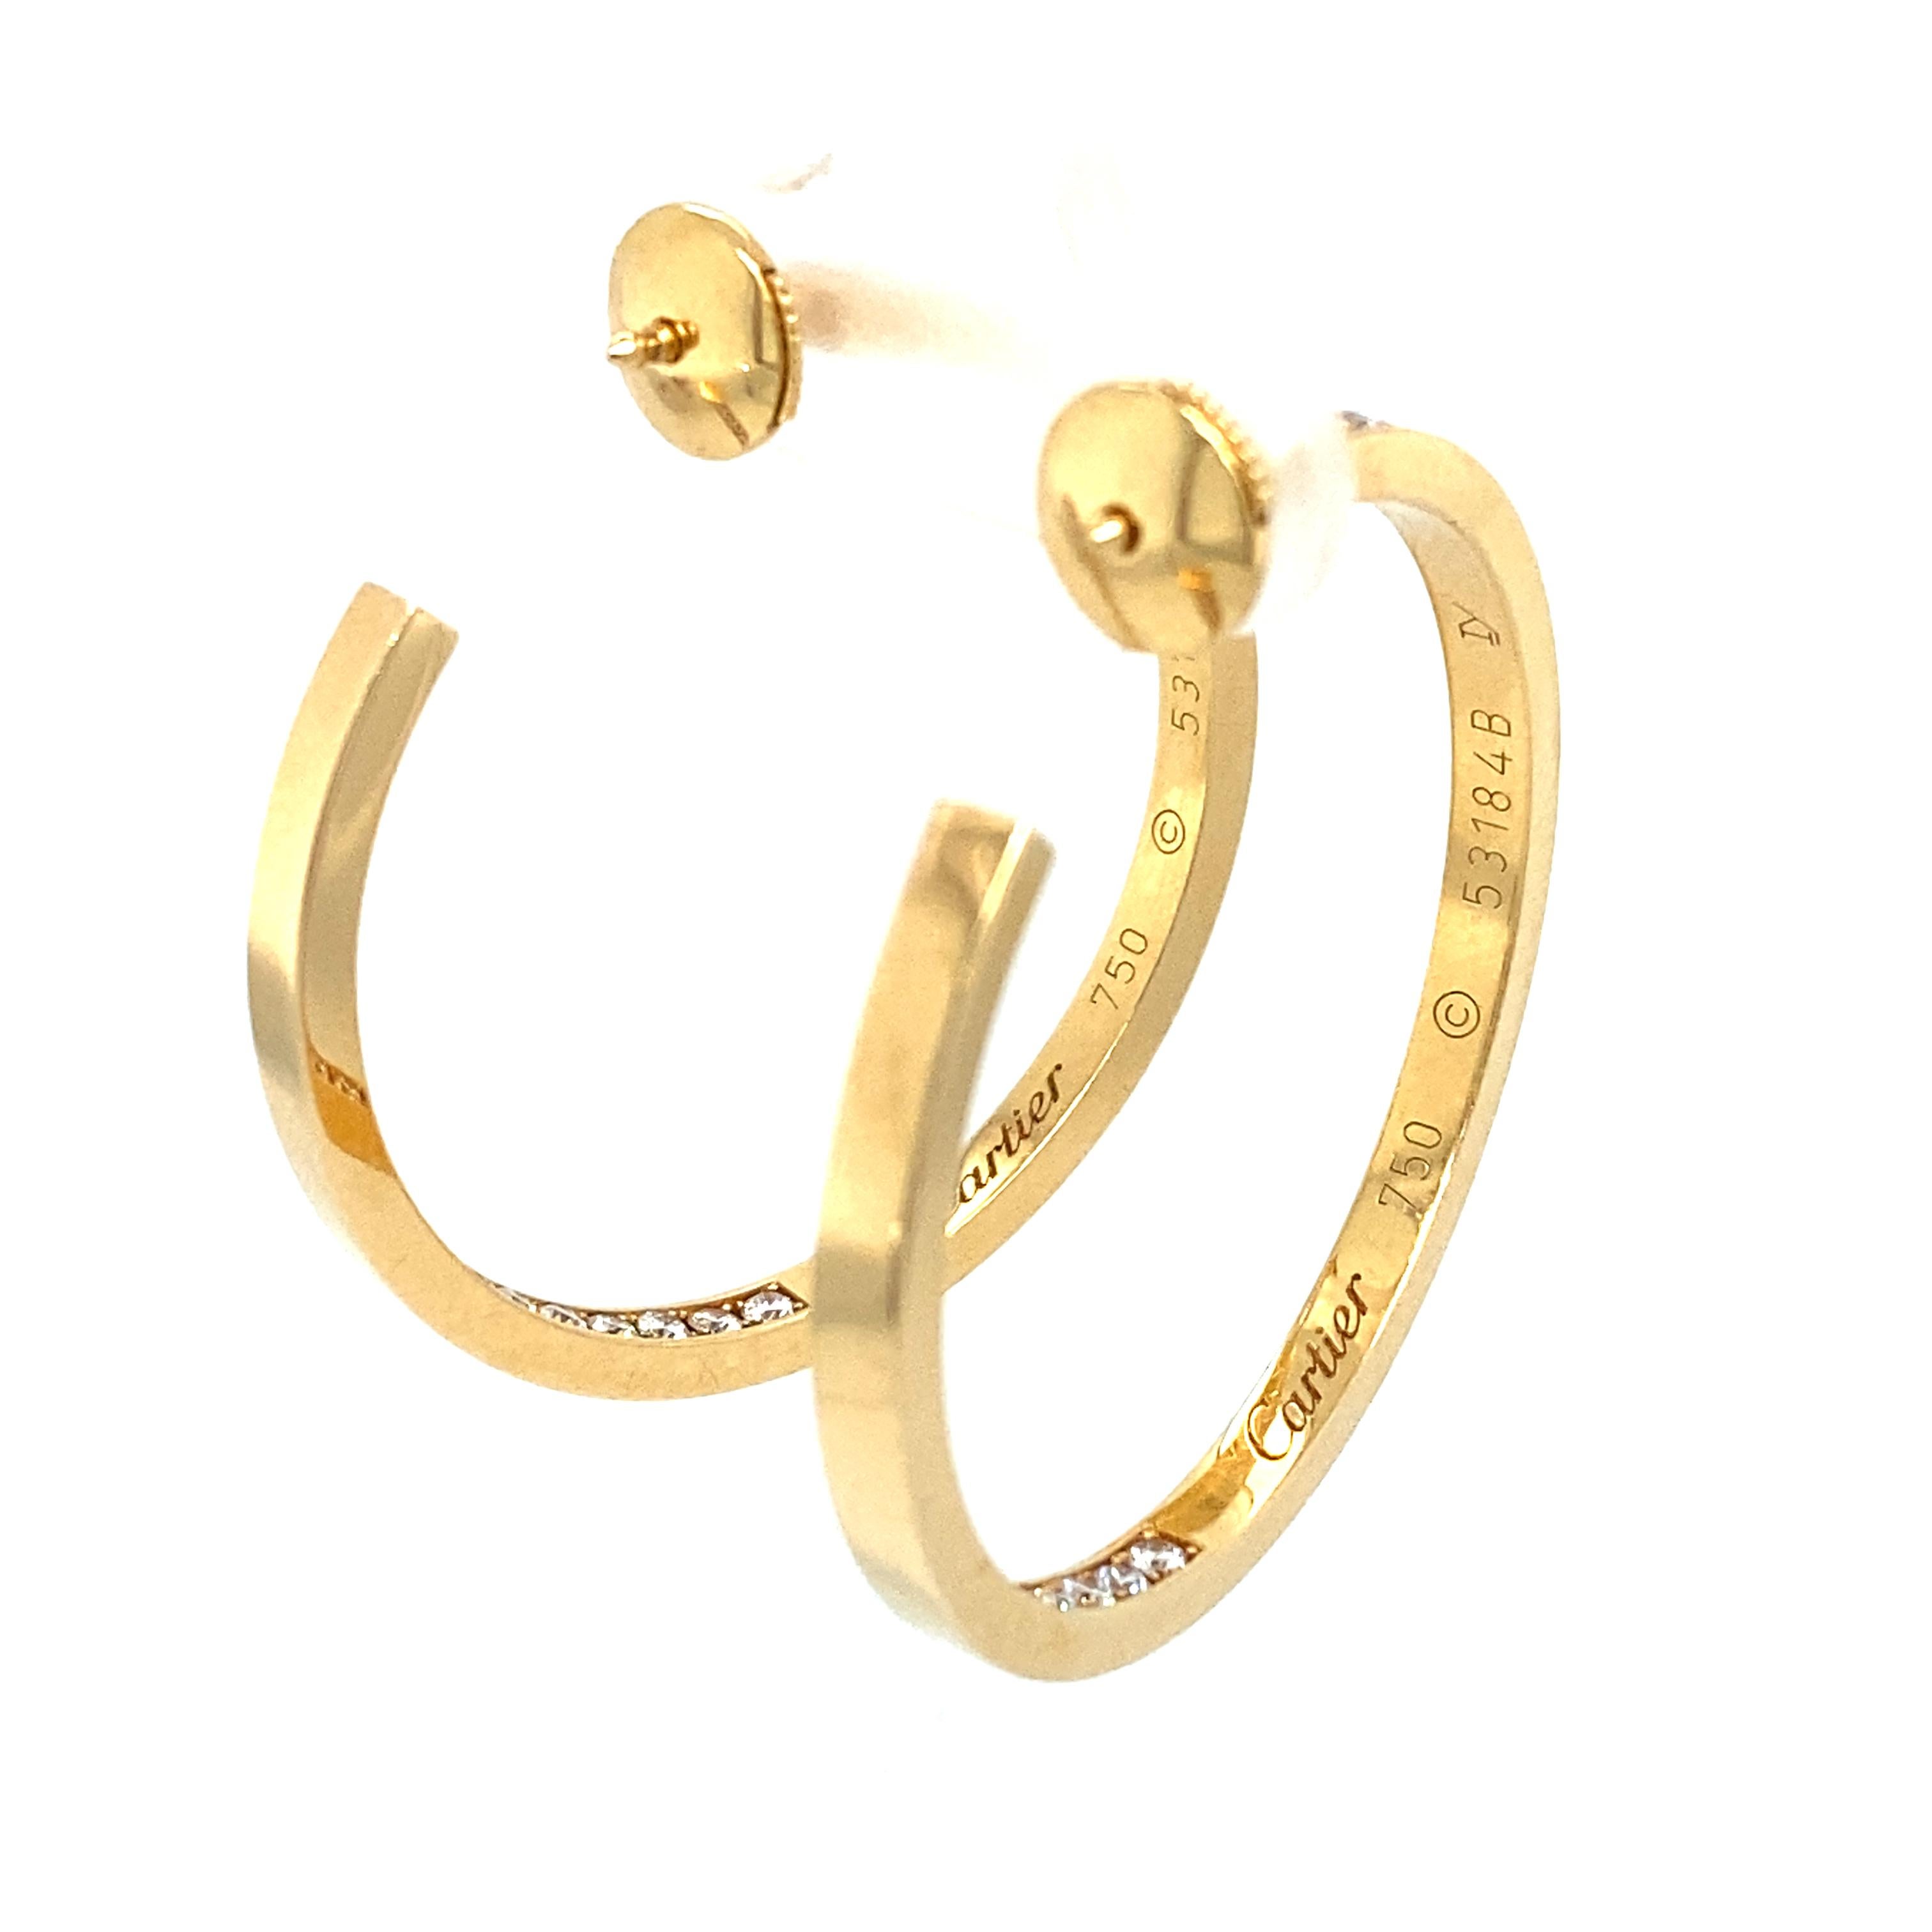 Cartier 2 Carat Total Weight Inside Out Diamond Hoop Earrings in 18 Karat Gold In Excellent Condition For Sale In Atlanta, GA